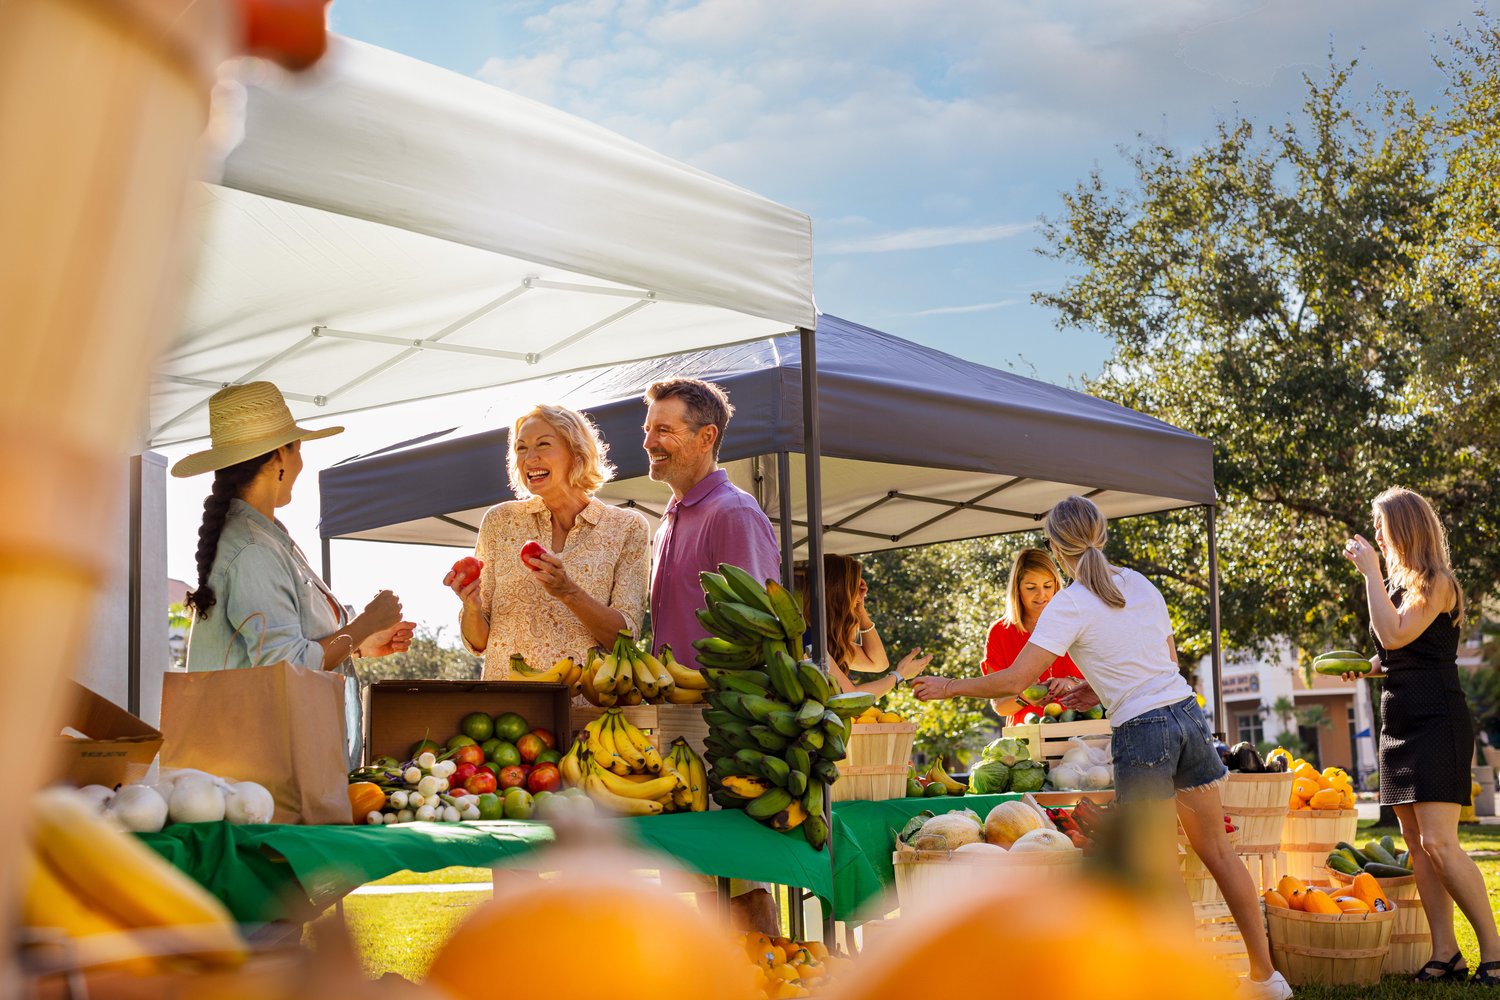 Ave Maria Town Center will host weekly farmers markets every Saturday from 9 a.m. to 2 p.m. through April 30.